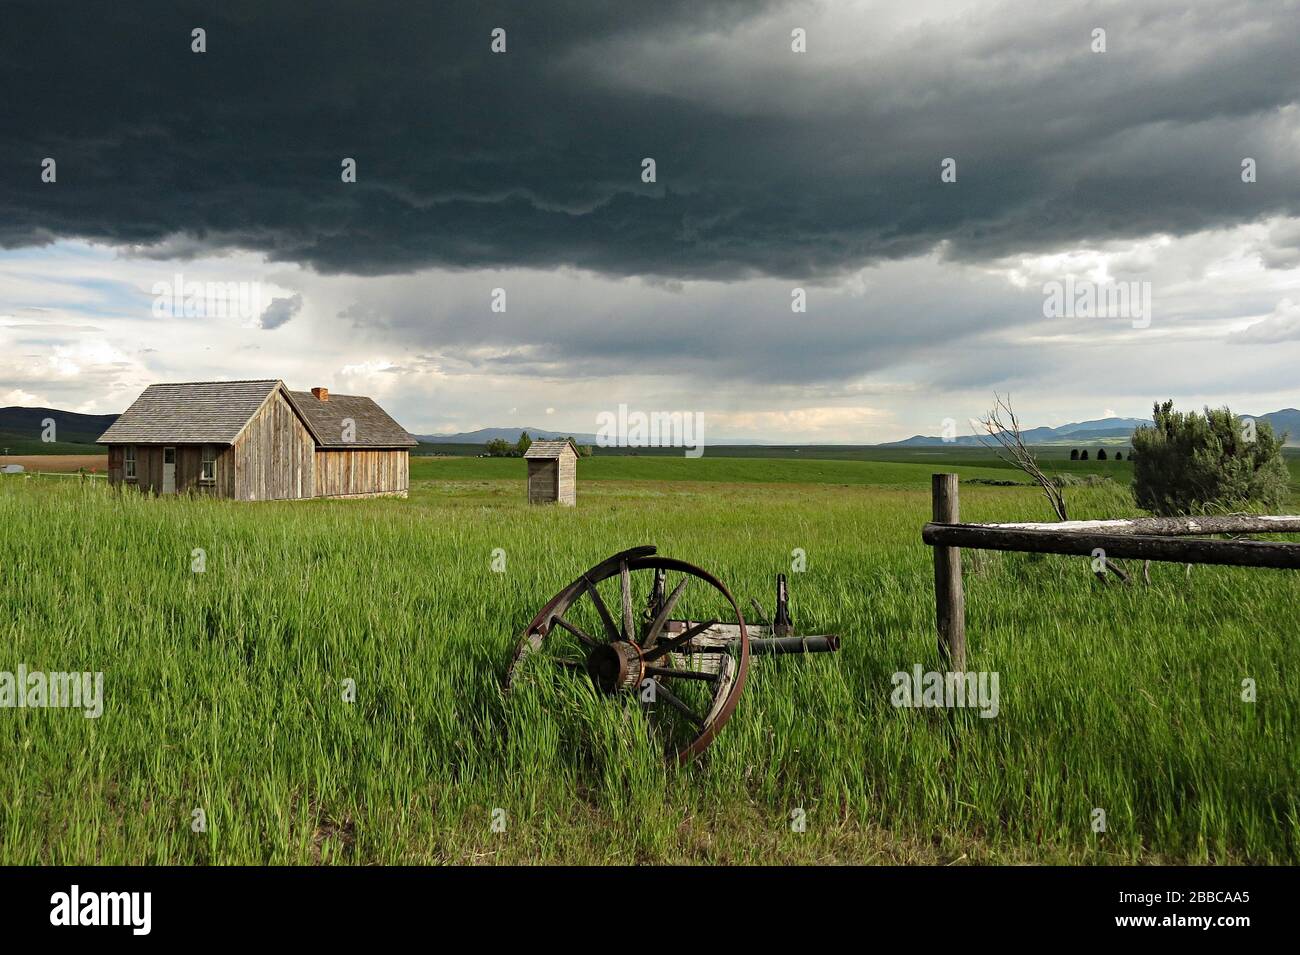 Farm house with storm clouds looming, Chesterfield, Idaho, USA Stock Photo